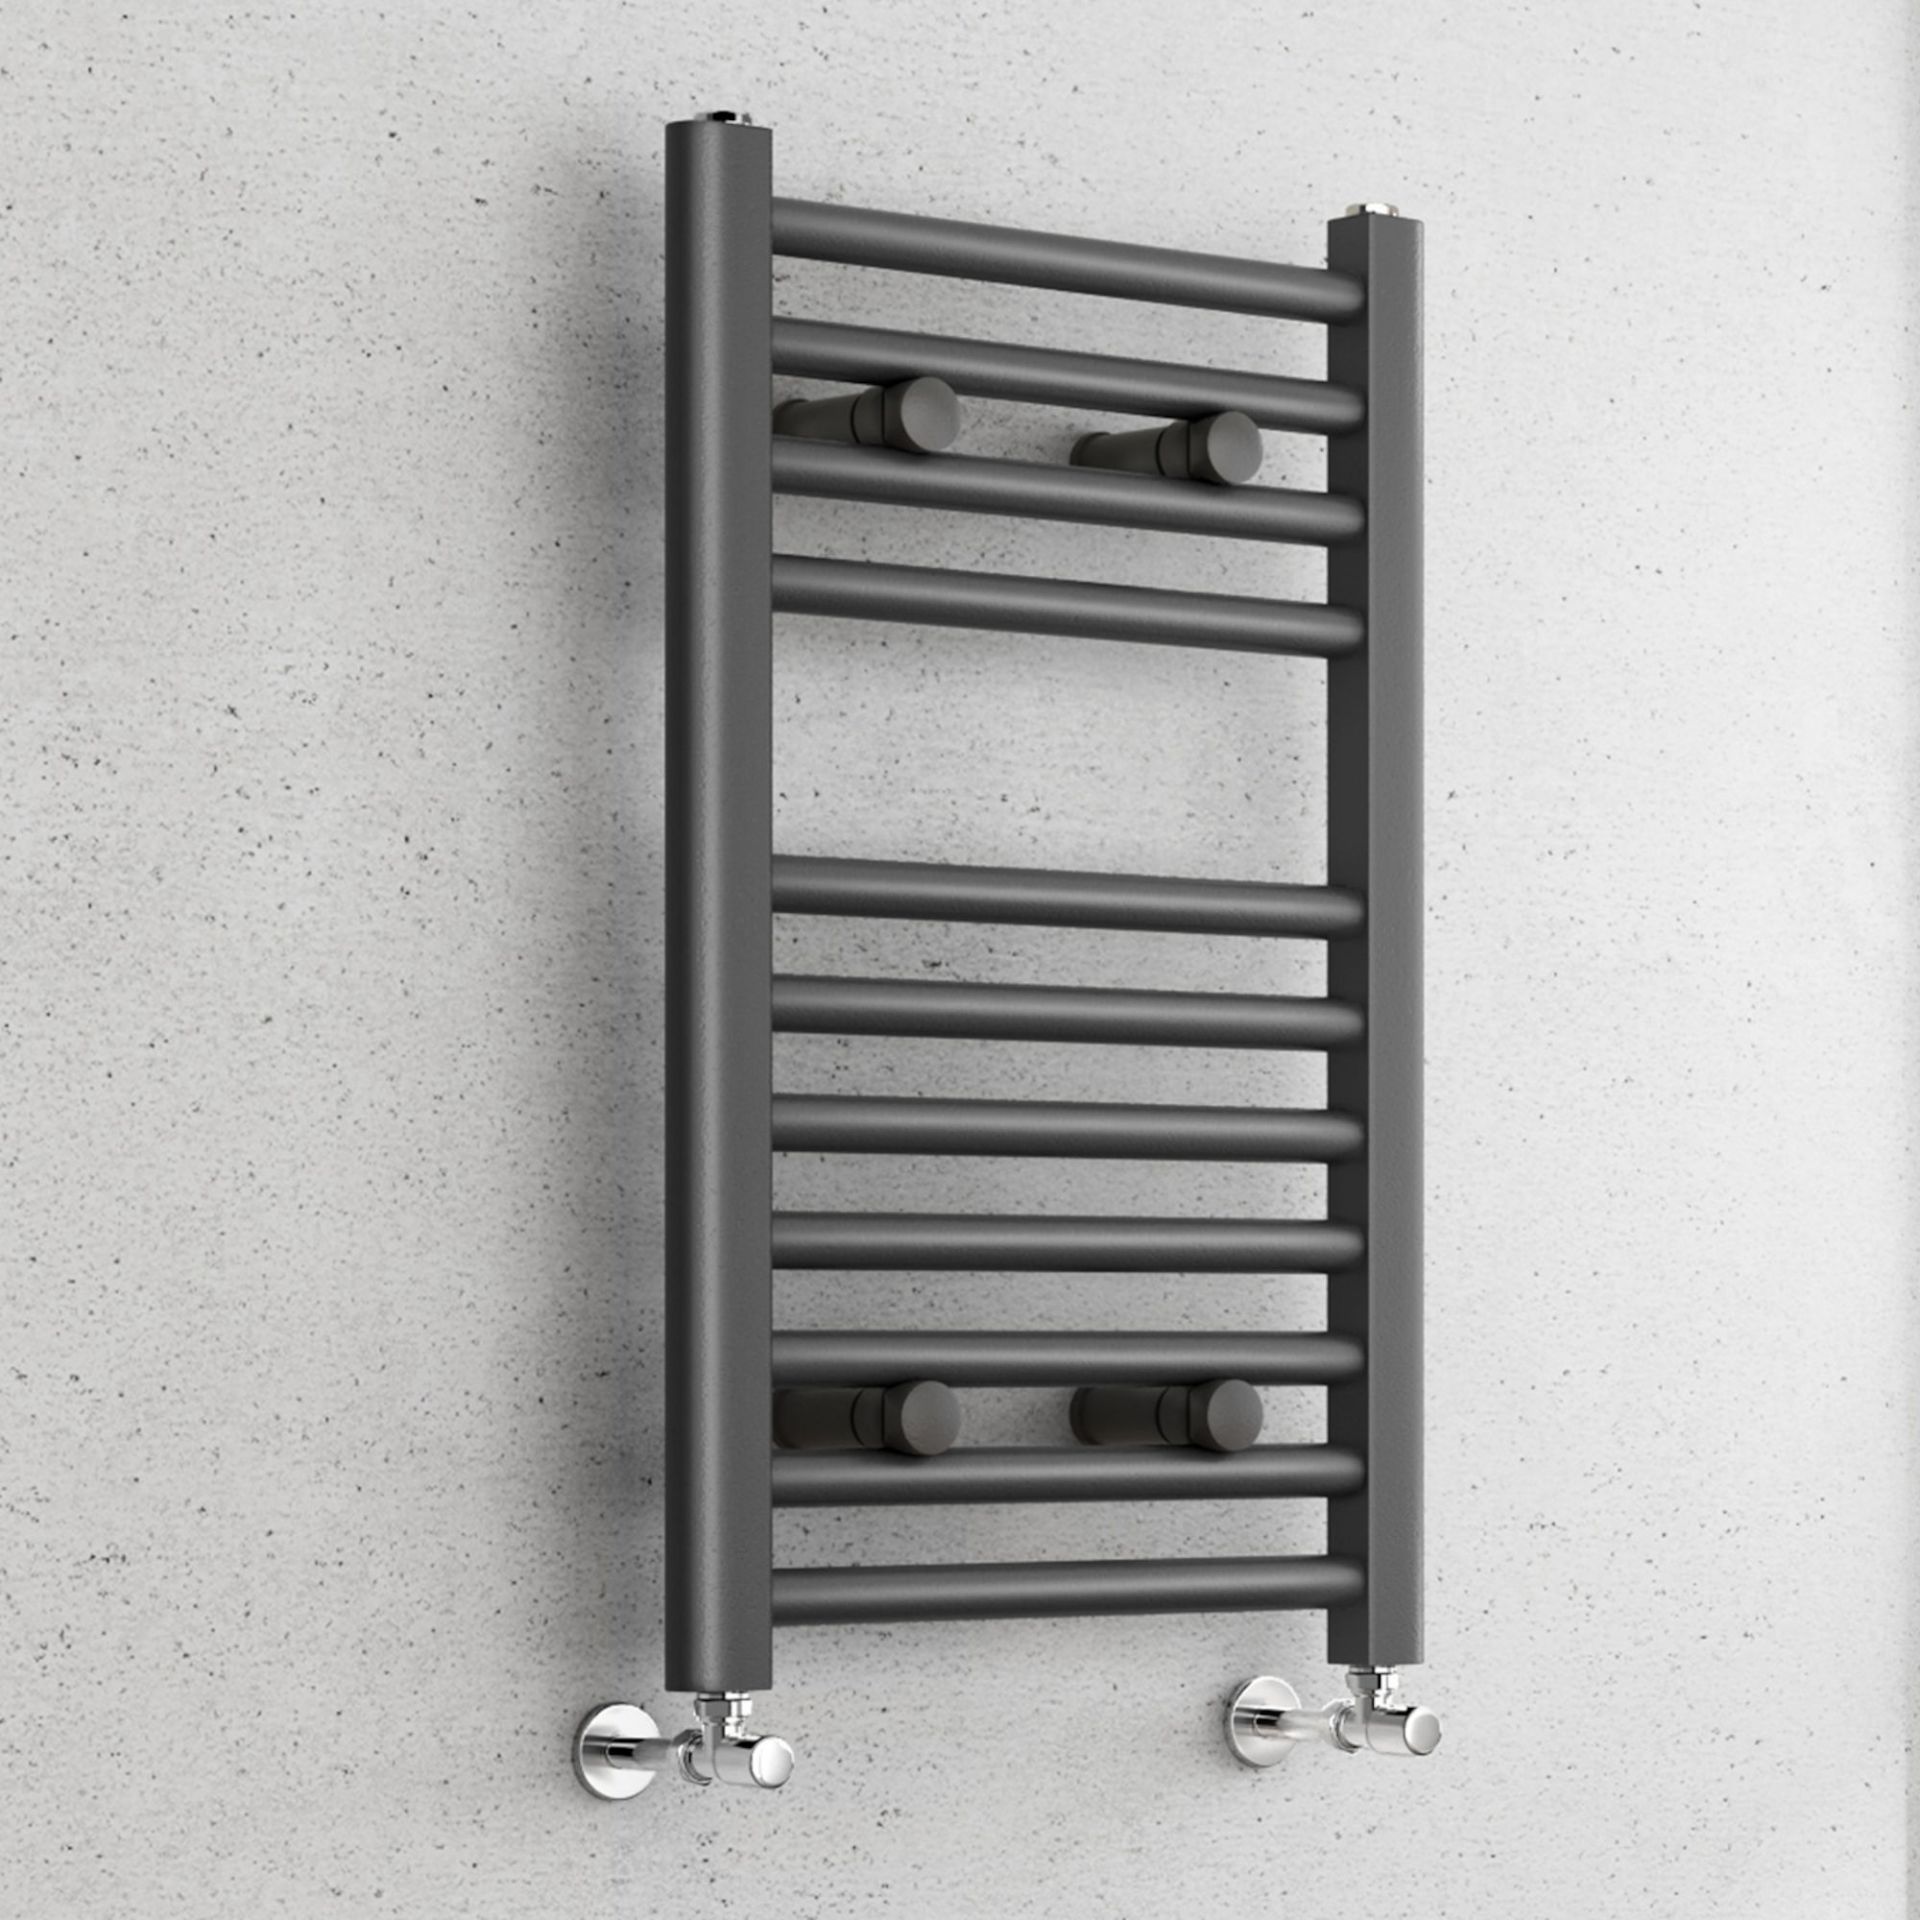 (PP21) 650x400mm - 25mm Tubes - Anthracite Heated Straight Rail Ladder Towel Radiator. RRP £17...